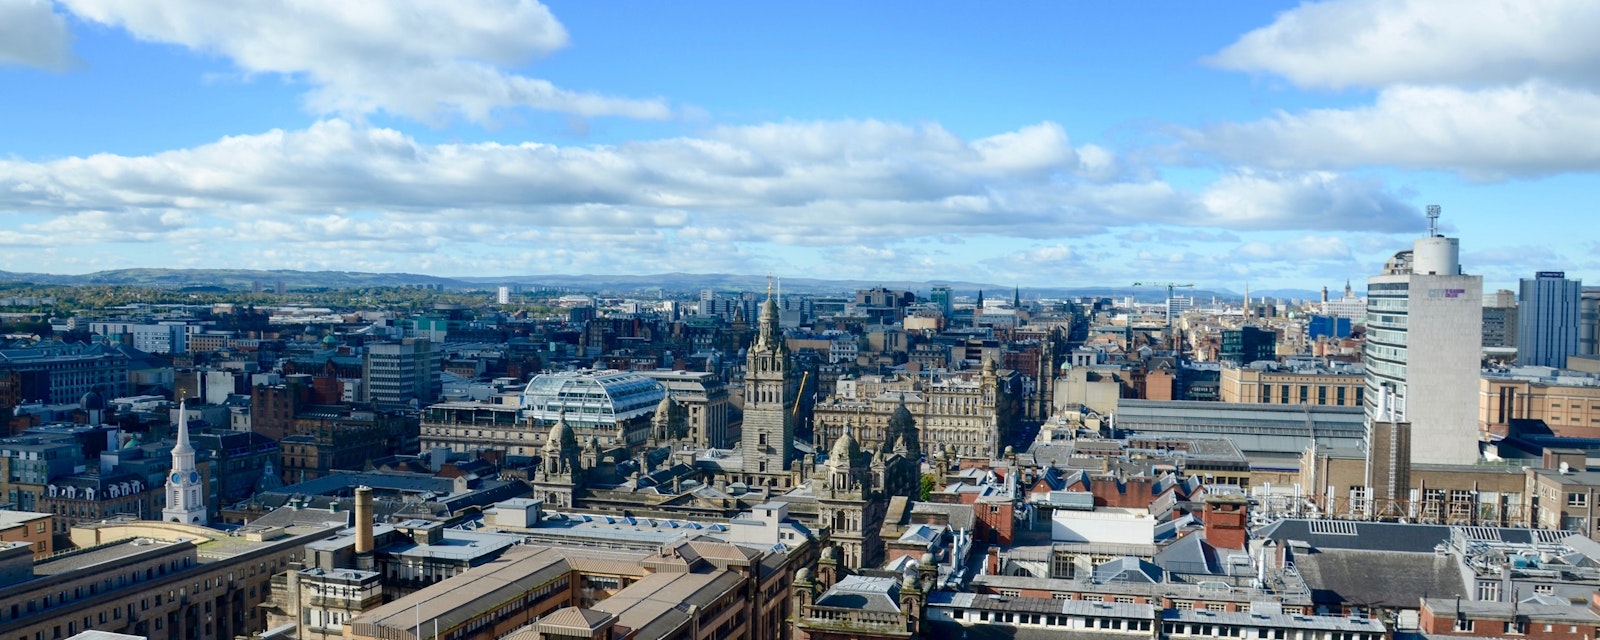 The,Glasgow,Skyline,Looking,Towards,George,Square,And,The,City